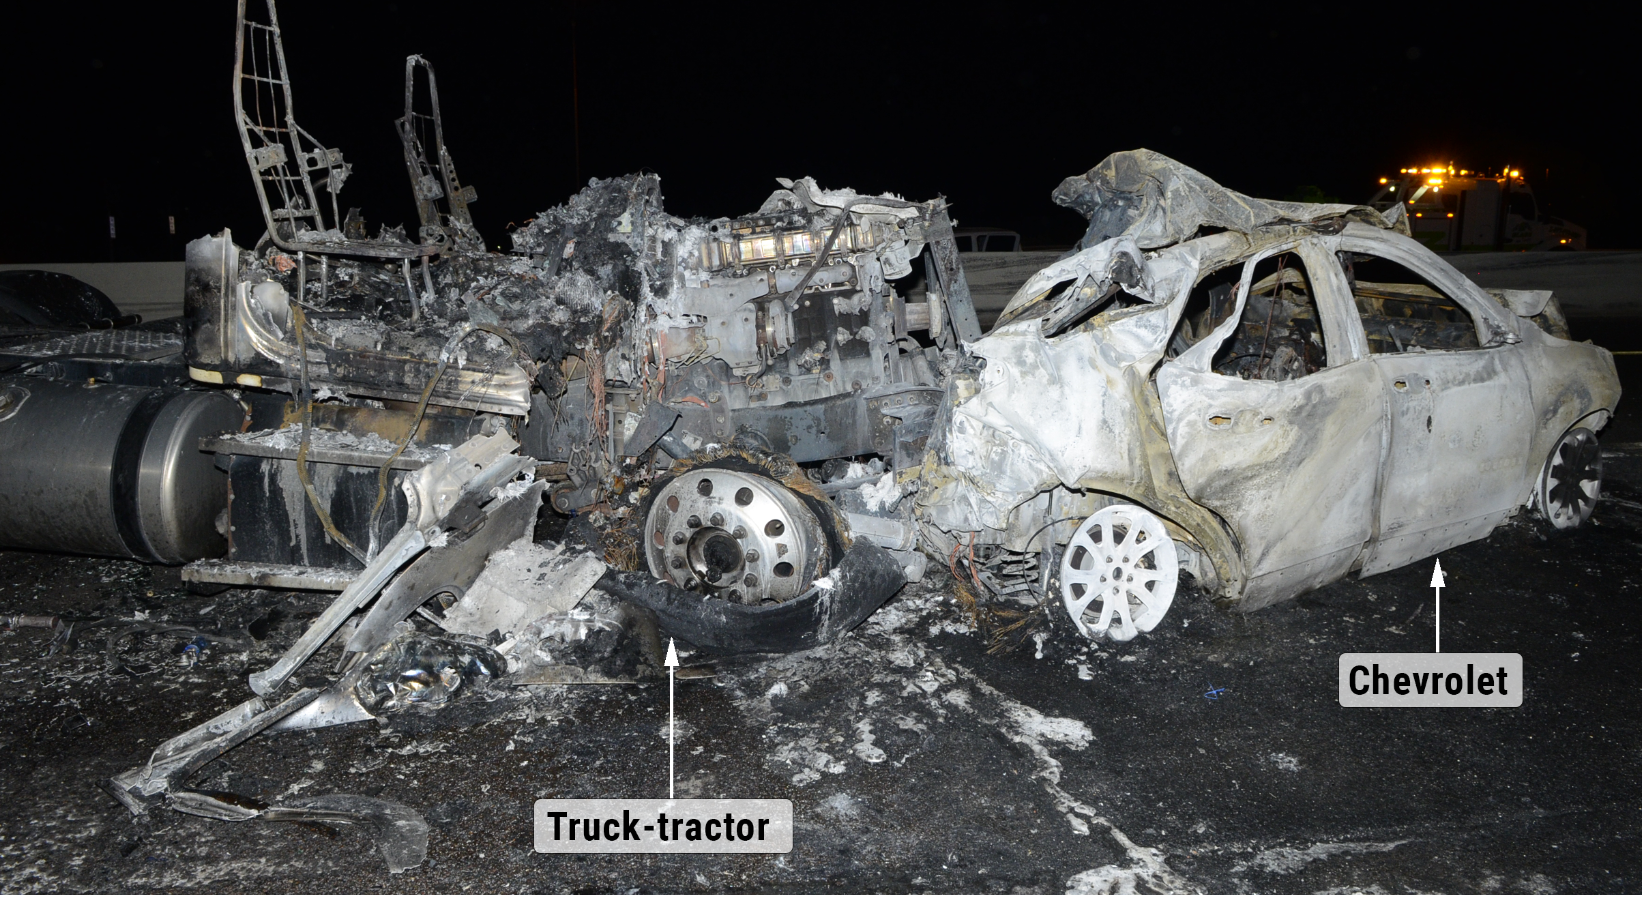 At-rest position of the truck-tractor and Chevrolet. (Source: AZDPS with annotations by the NTSB.) Alt-text : On-scene, postcras